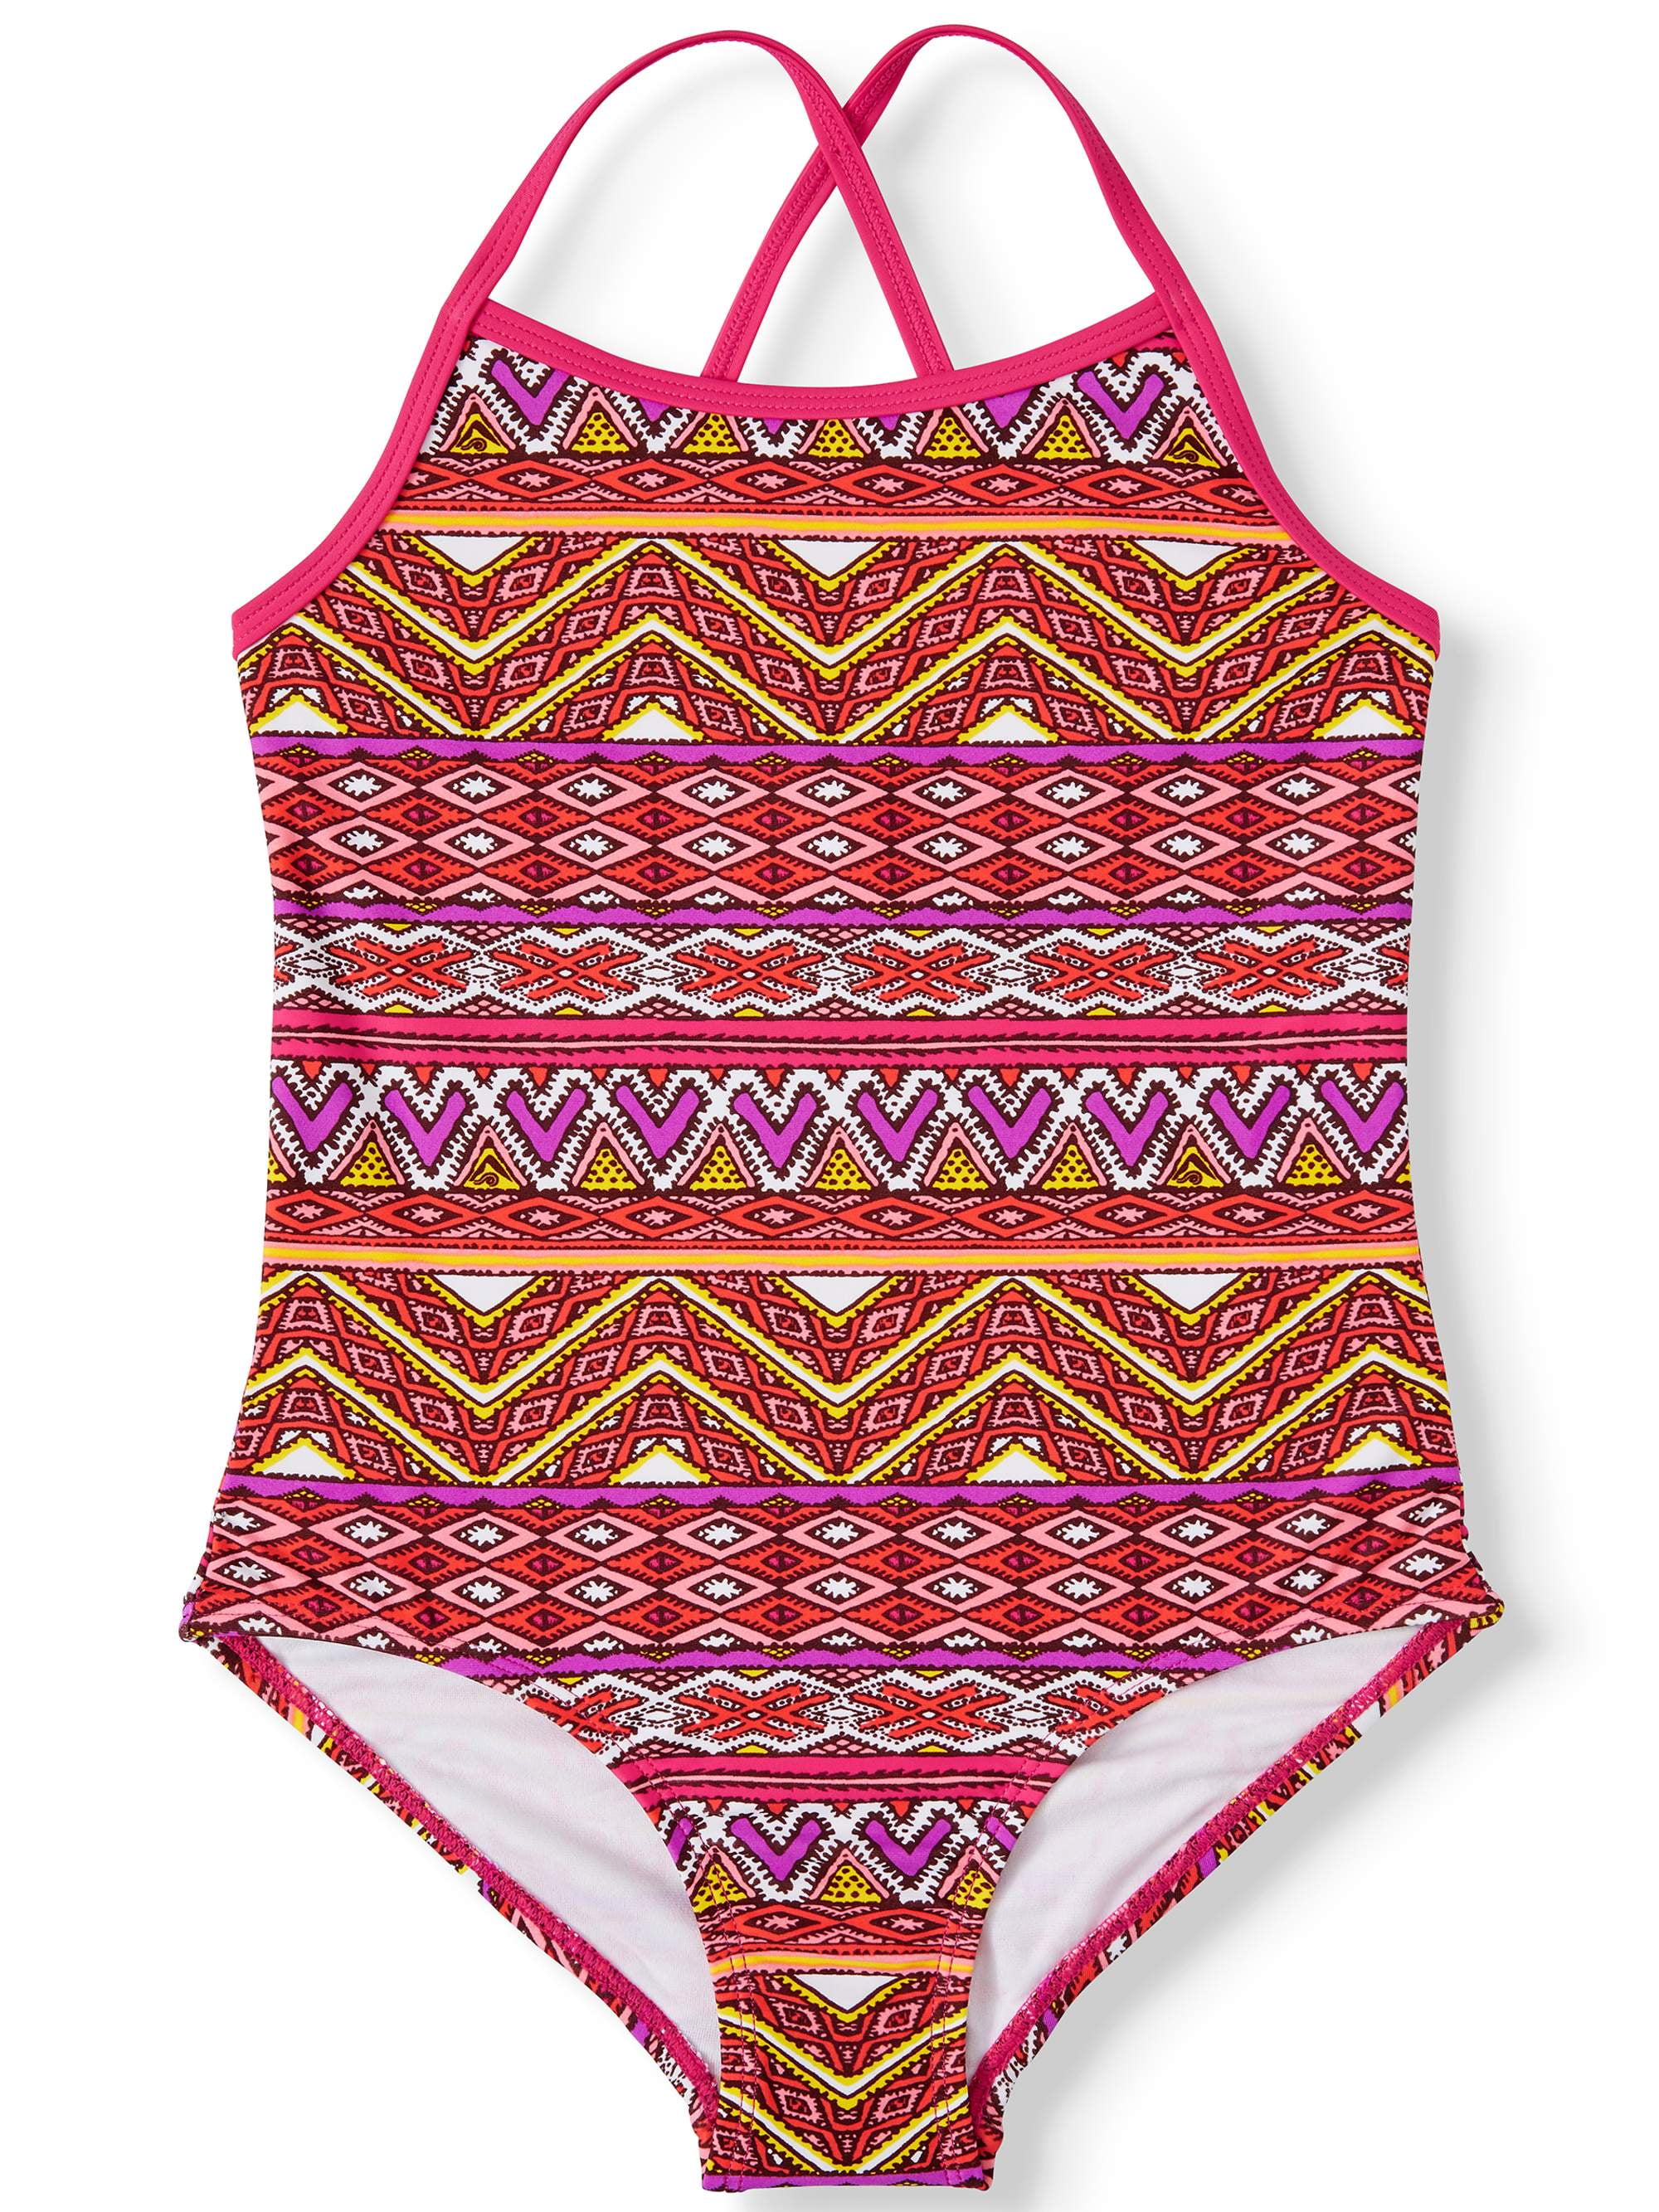 Kanu Surf Girls 7-14 Carrie Geo Print UPF 50+ Banded One-Piece Swimsuit ...